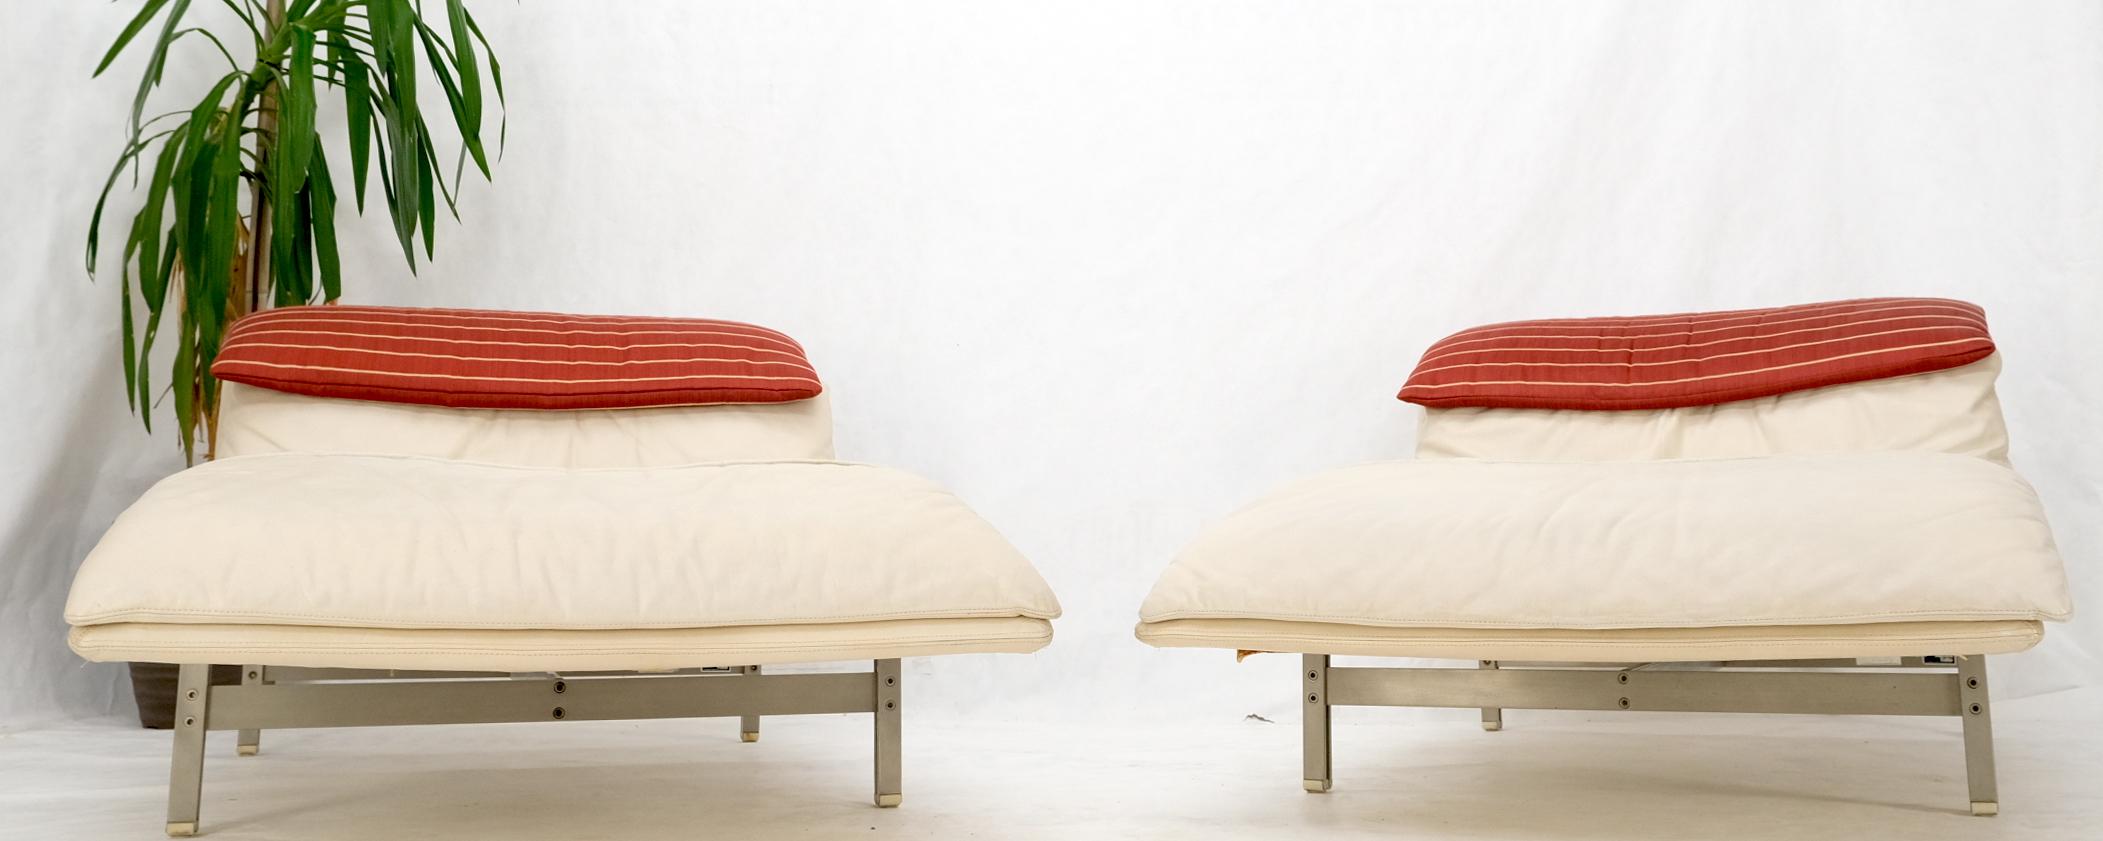 Pair of Sapority Italian Mid Century Modern Leather Chaise Lounges For Sale 2